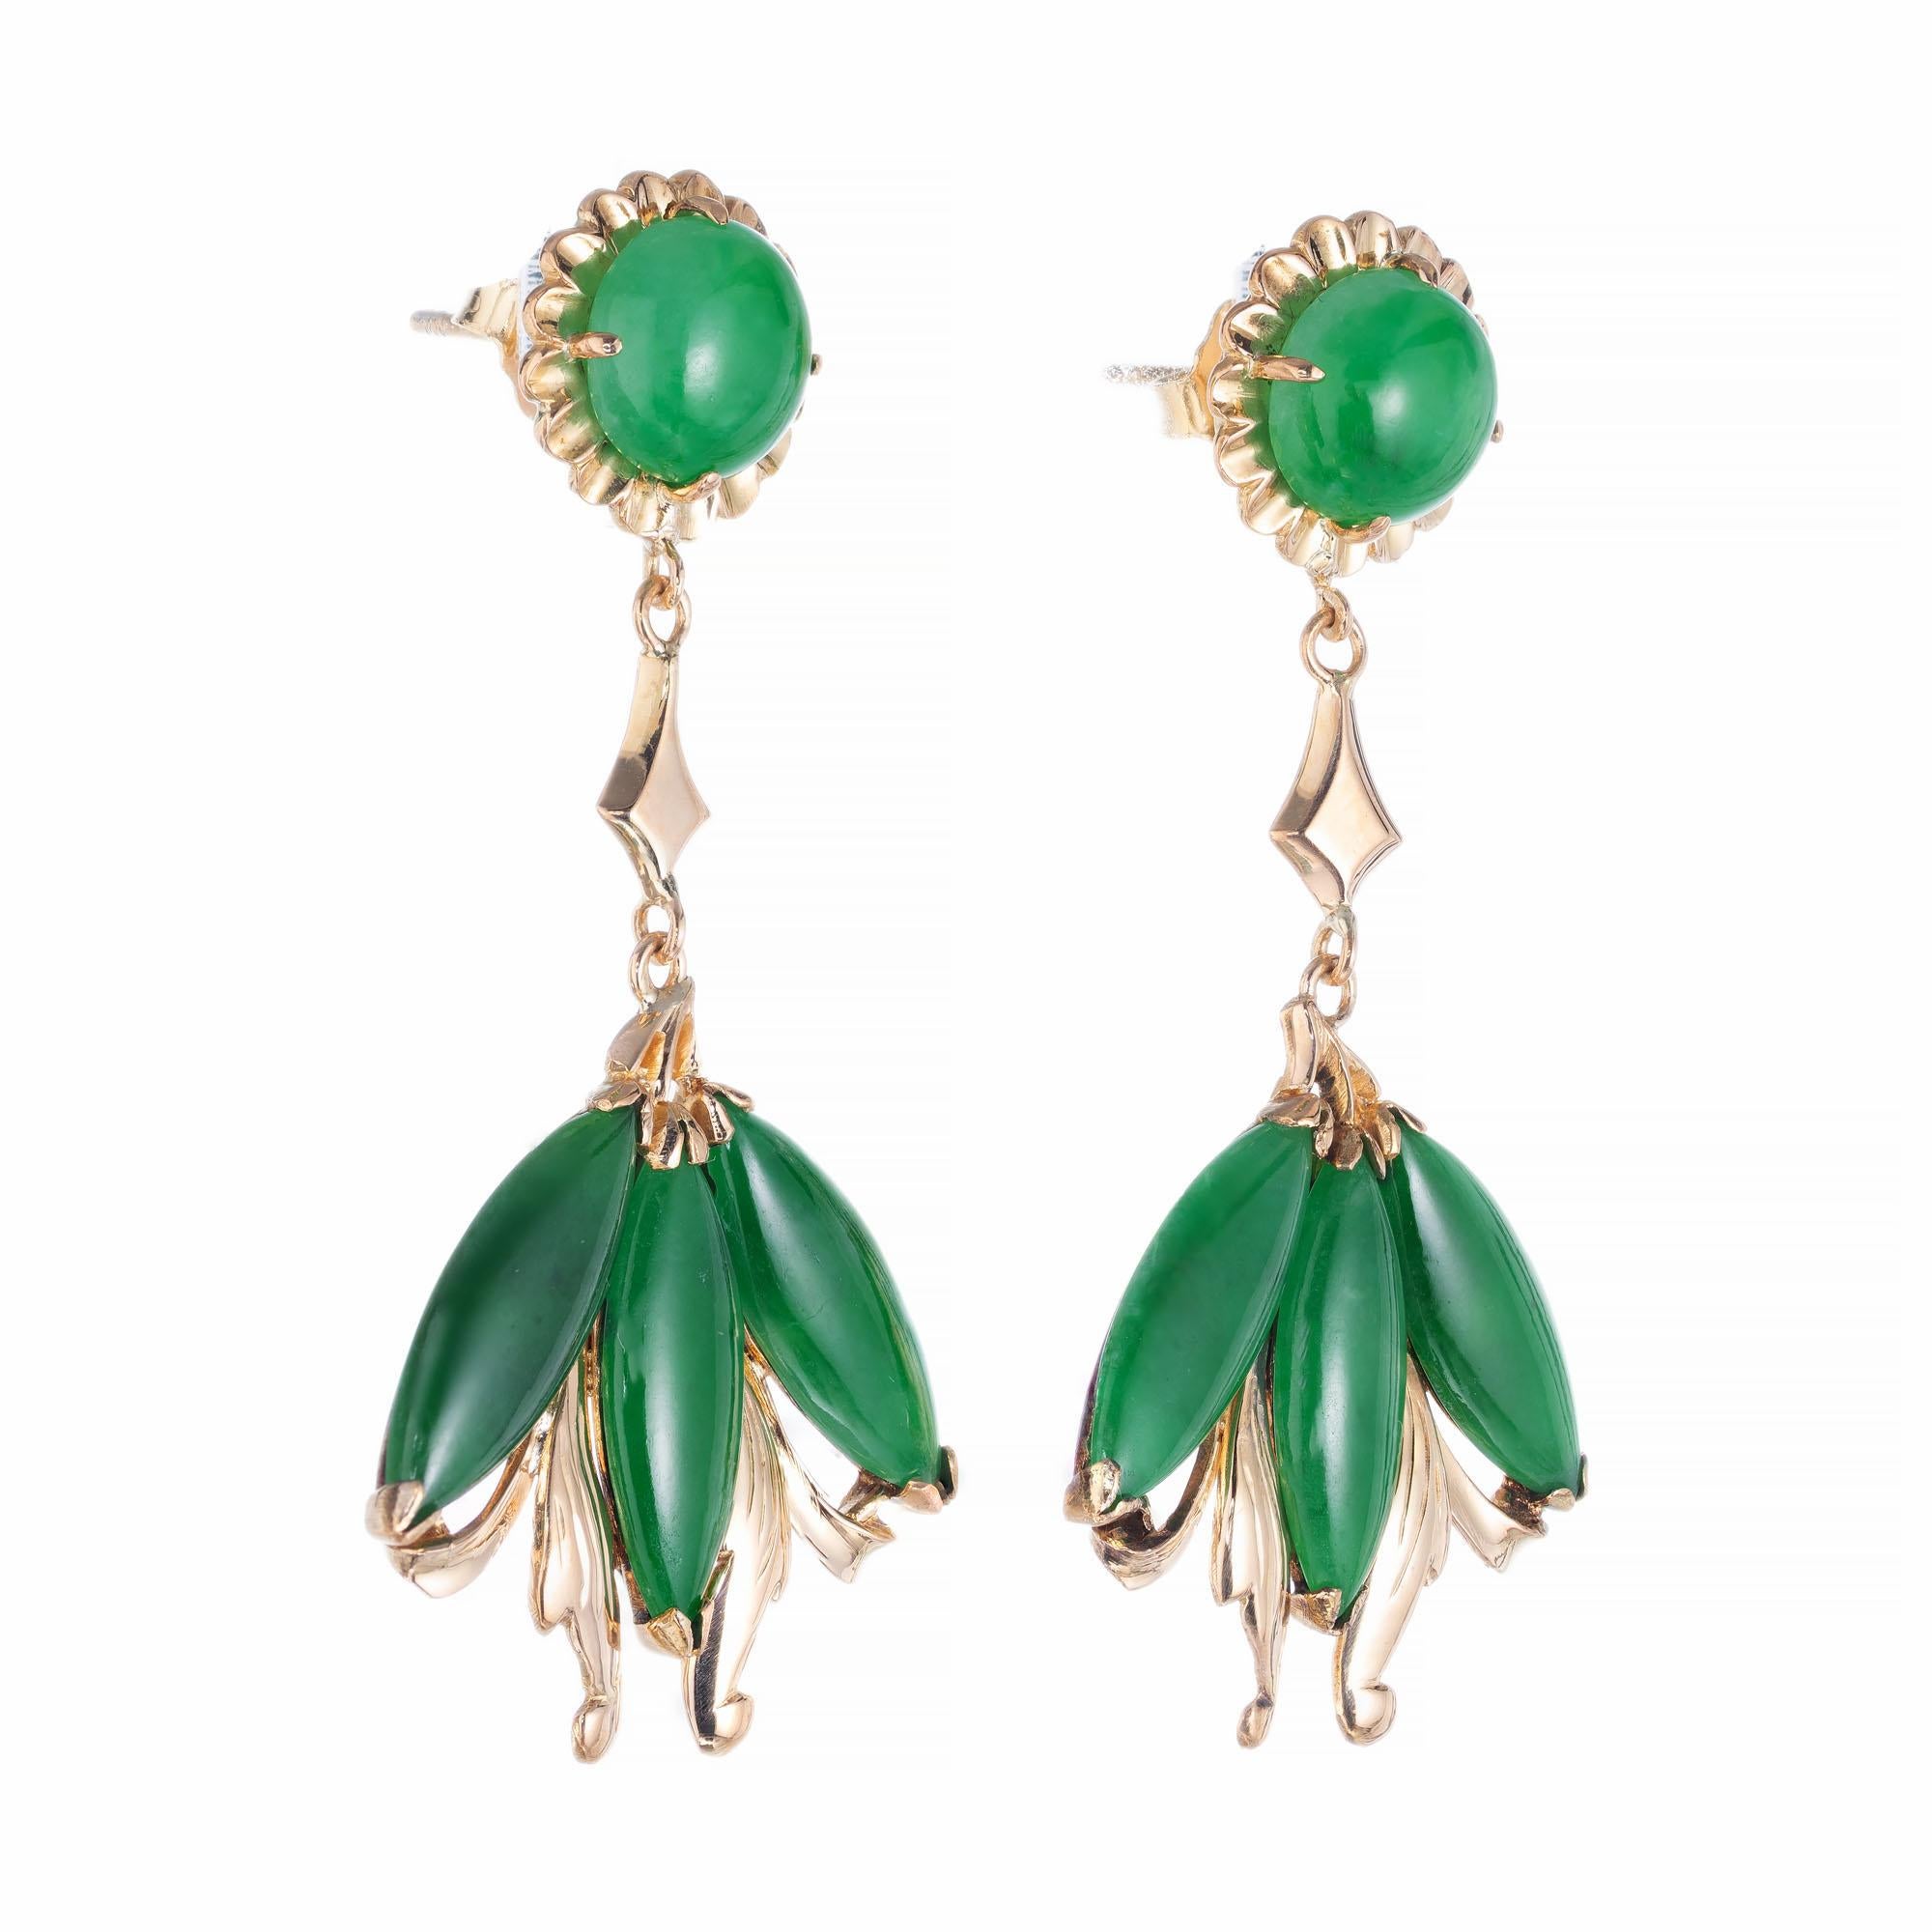 Green natural untreated Omphacite Jadeite Jade GIA certified natural untreated handmade 22k yellow gold dangle chandelier earrings. 18k earring backs.

22k & 18k yellow gold
6 Marquise cabochon bright green translucent Jadeite Jade, 12.44 x 4.44 x